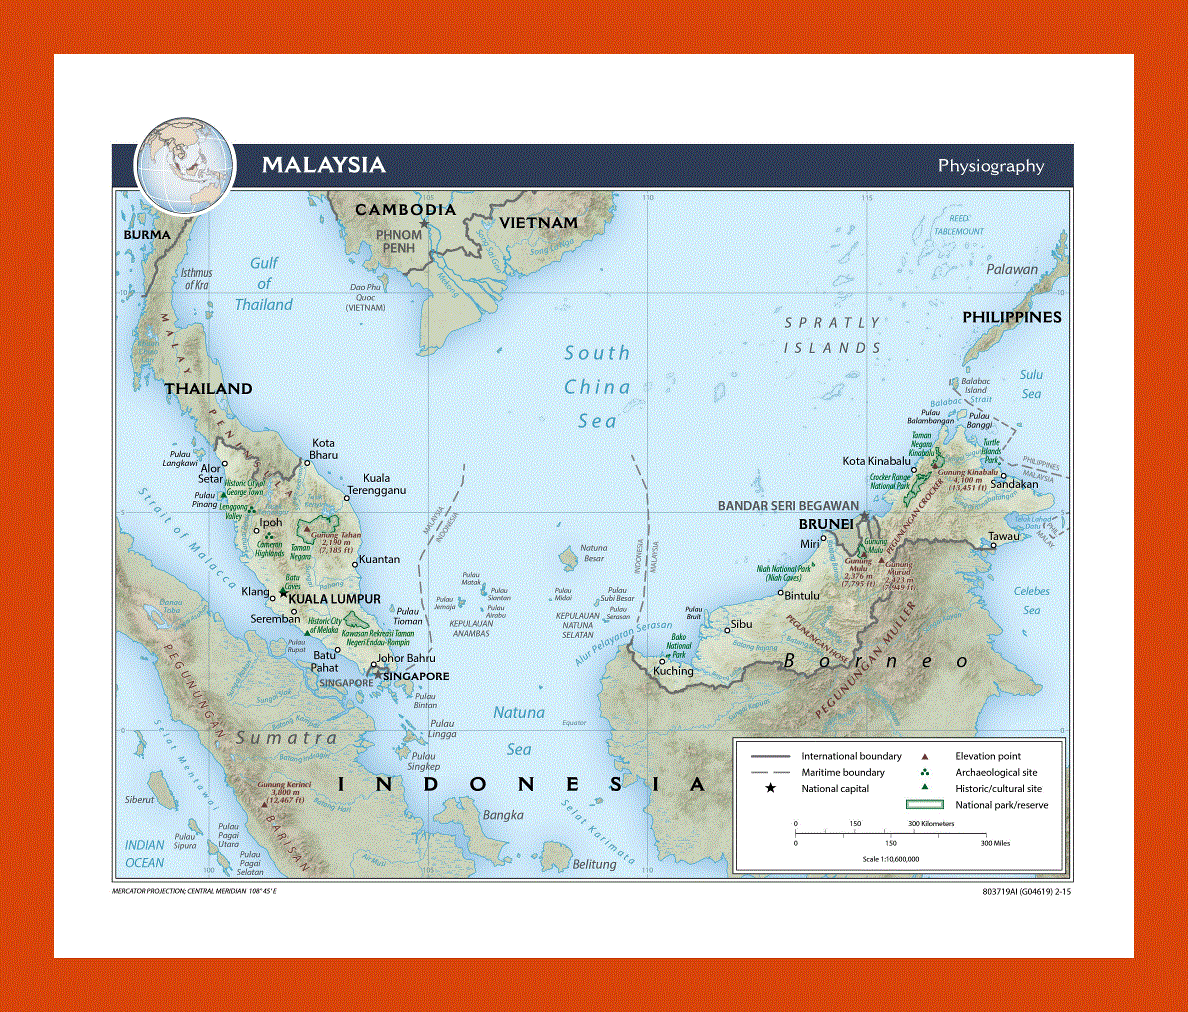 Physiography map of Malaysia - 2015